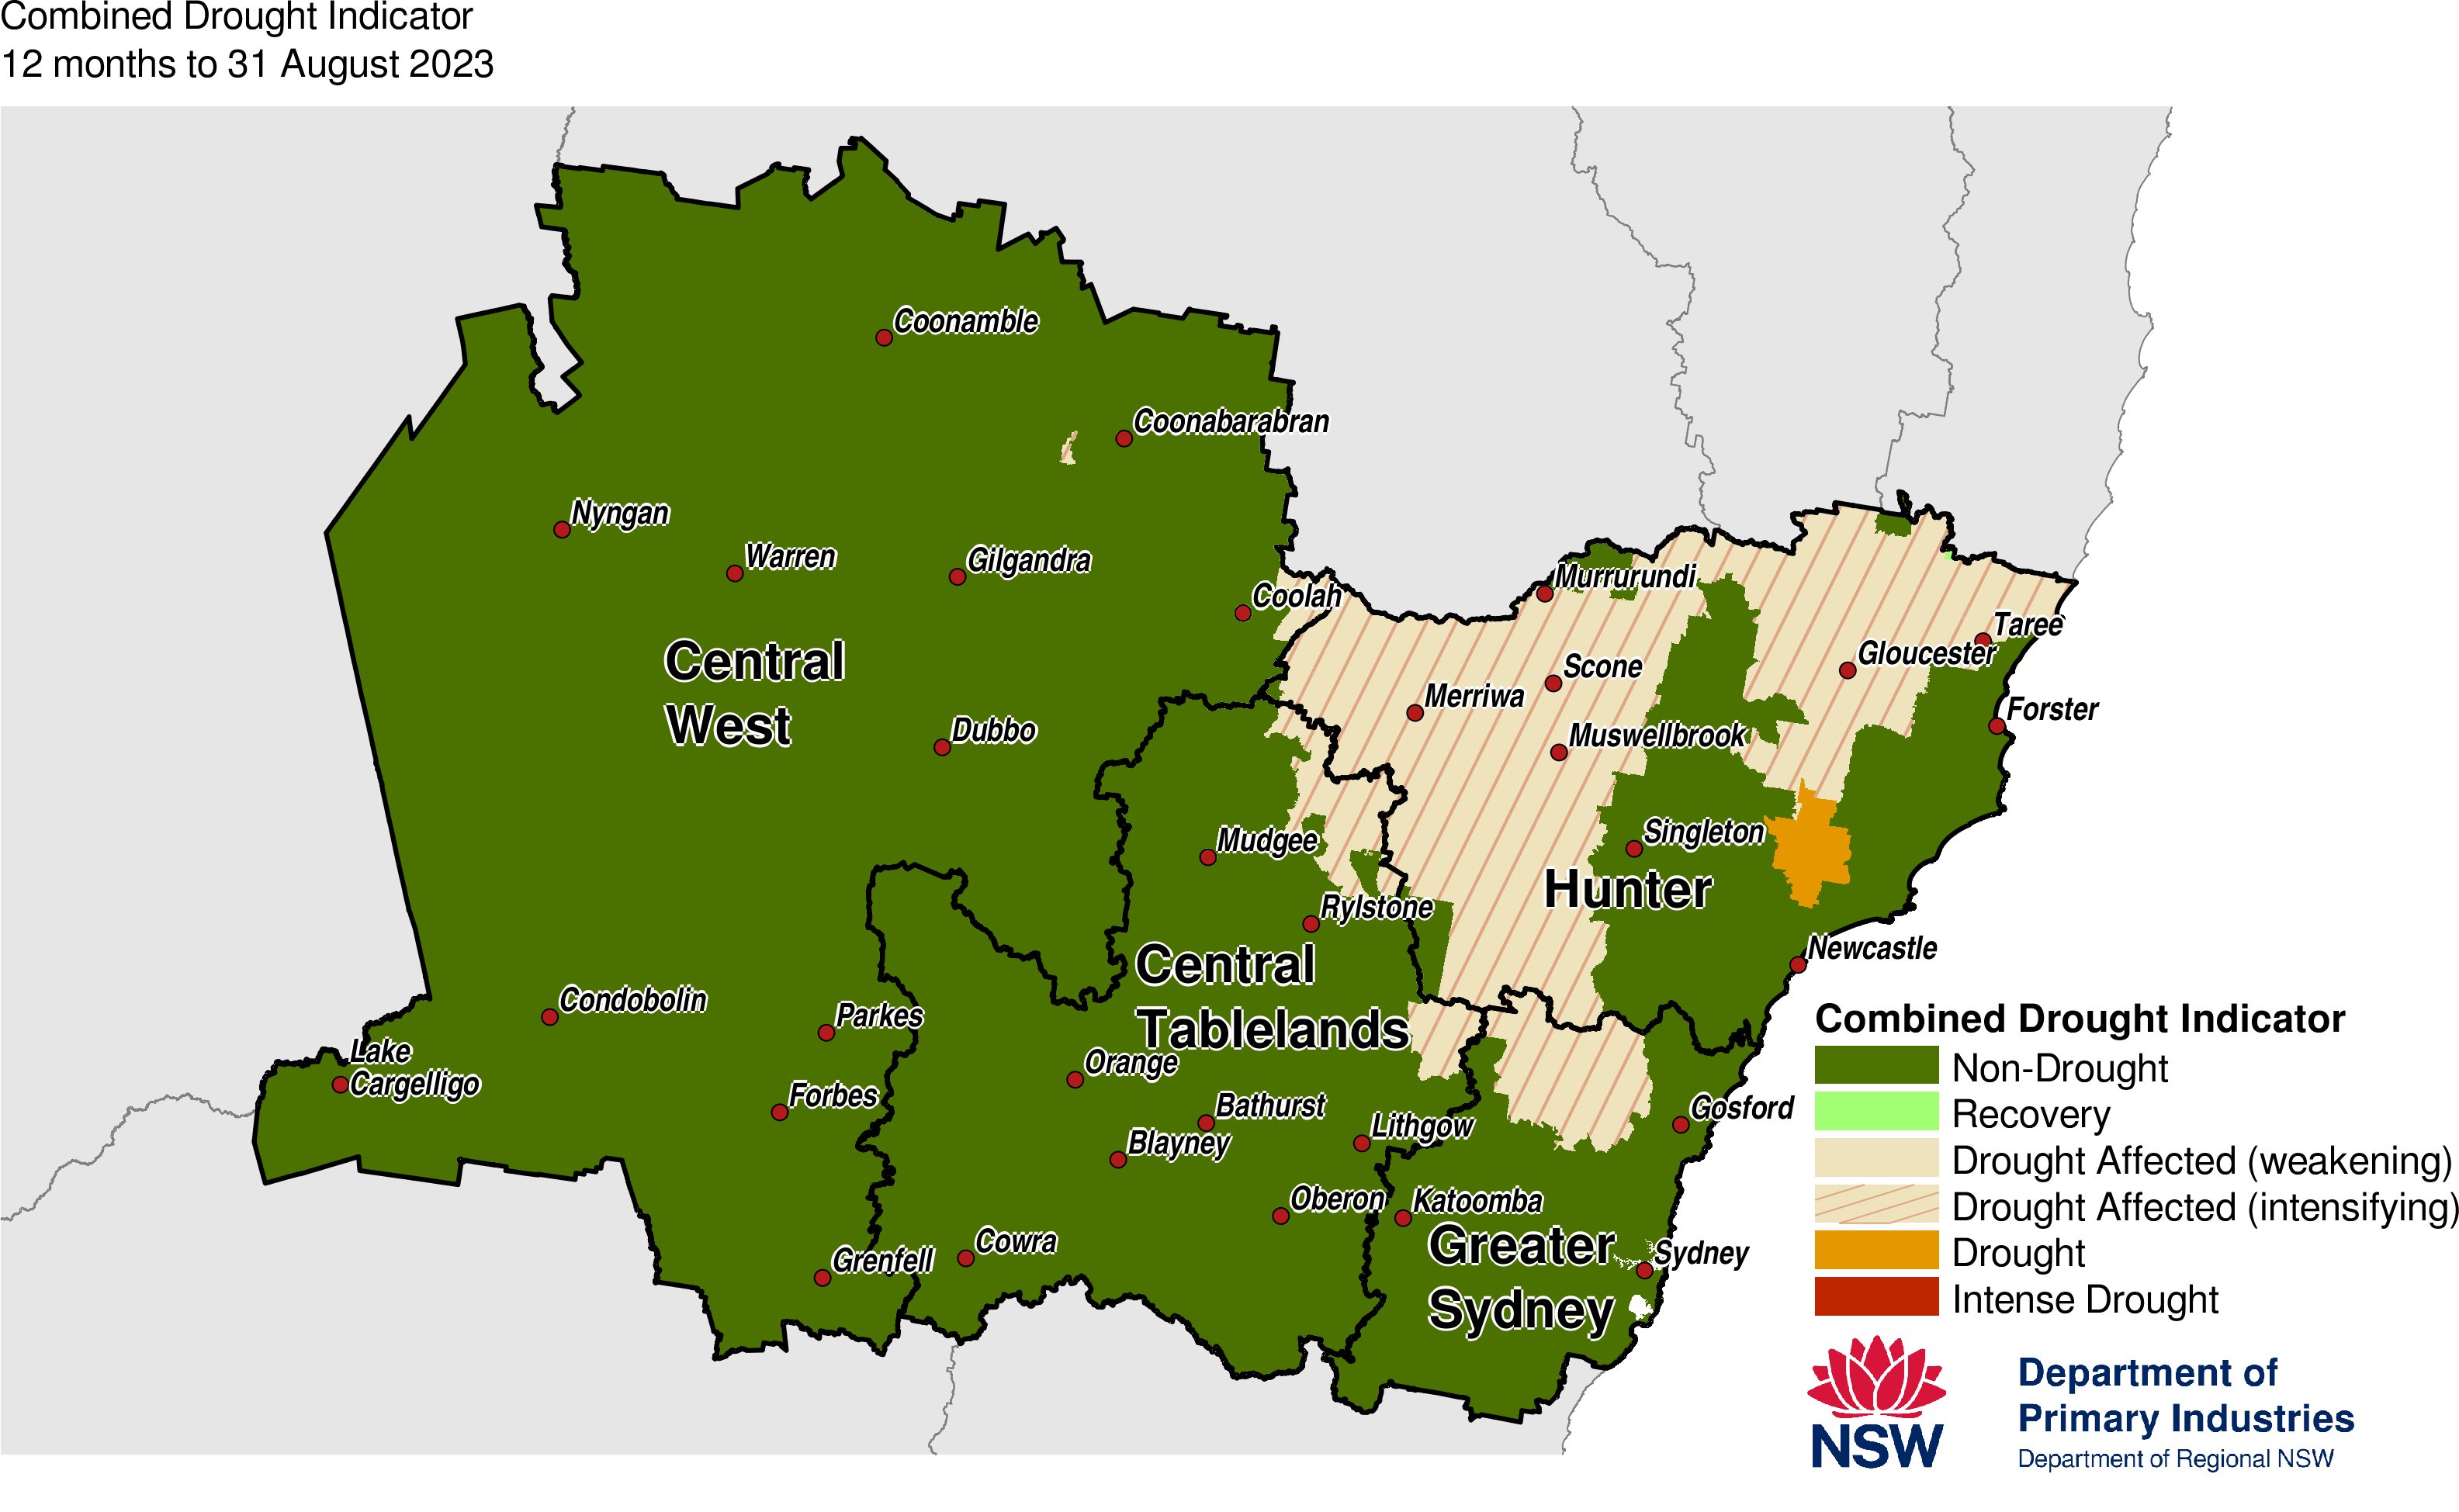 Figure 27. Combined Drought Indicator for the Central Tablelands, Central West, Hunter and Greater Sydney regions